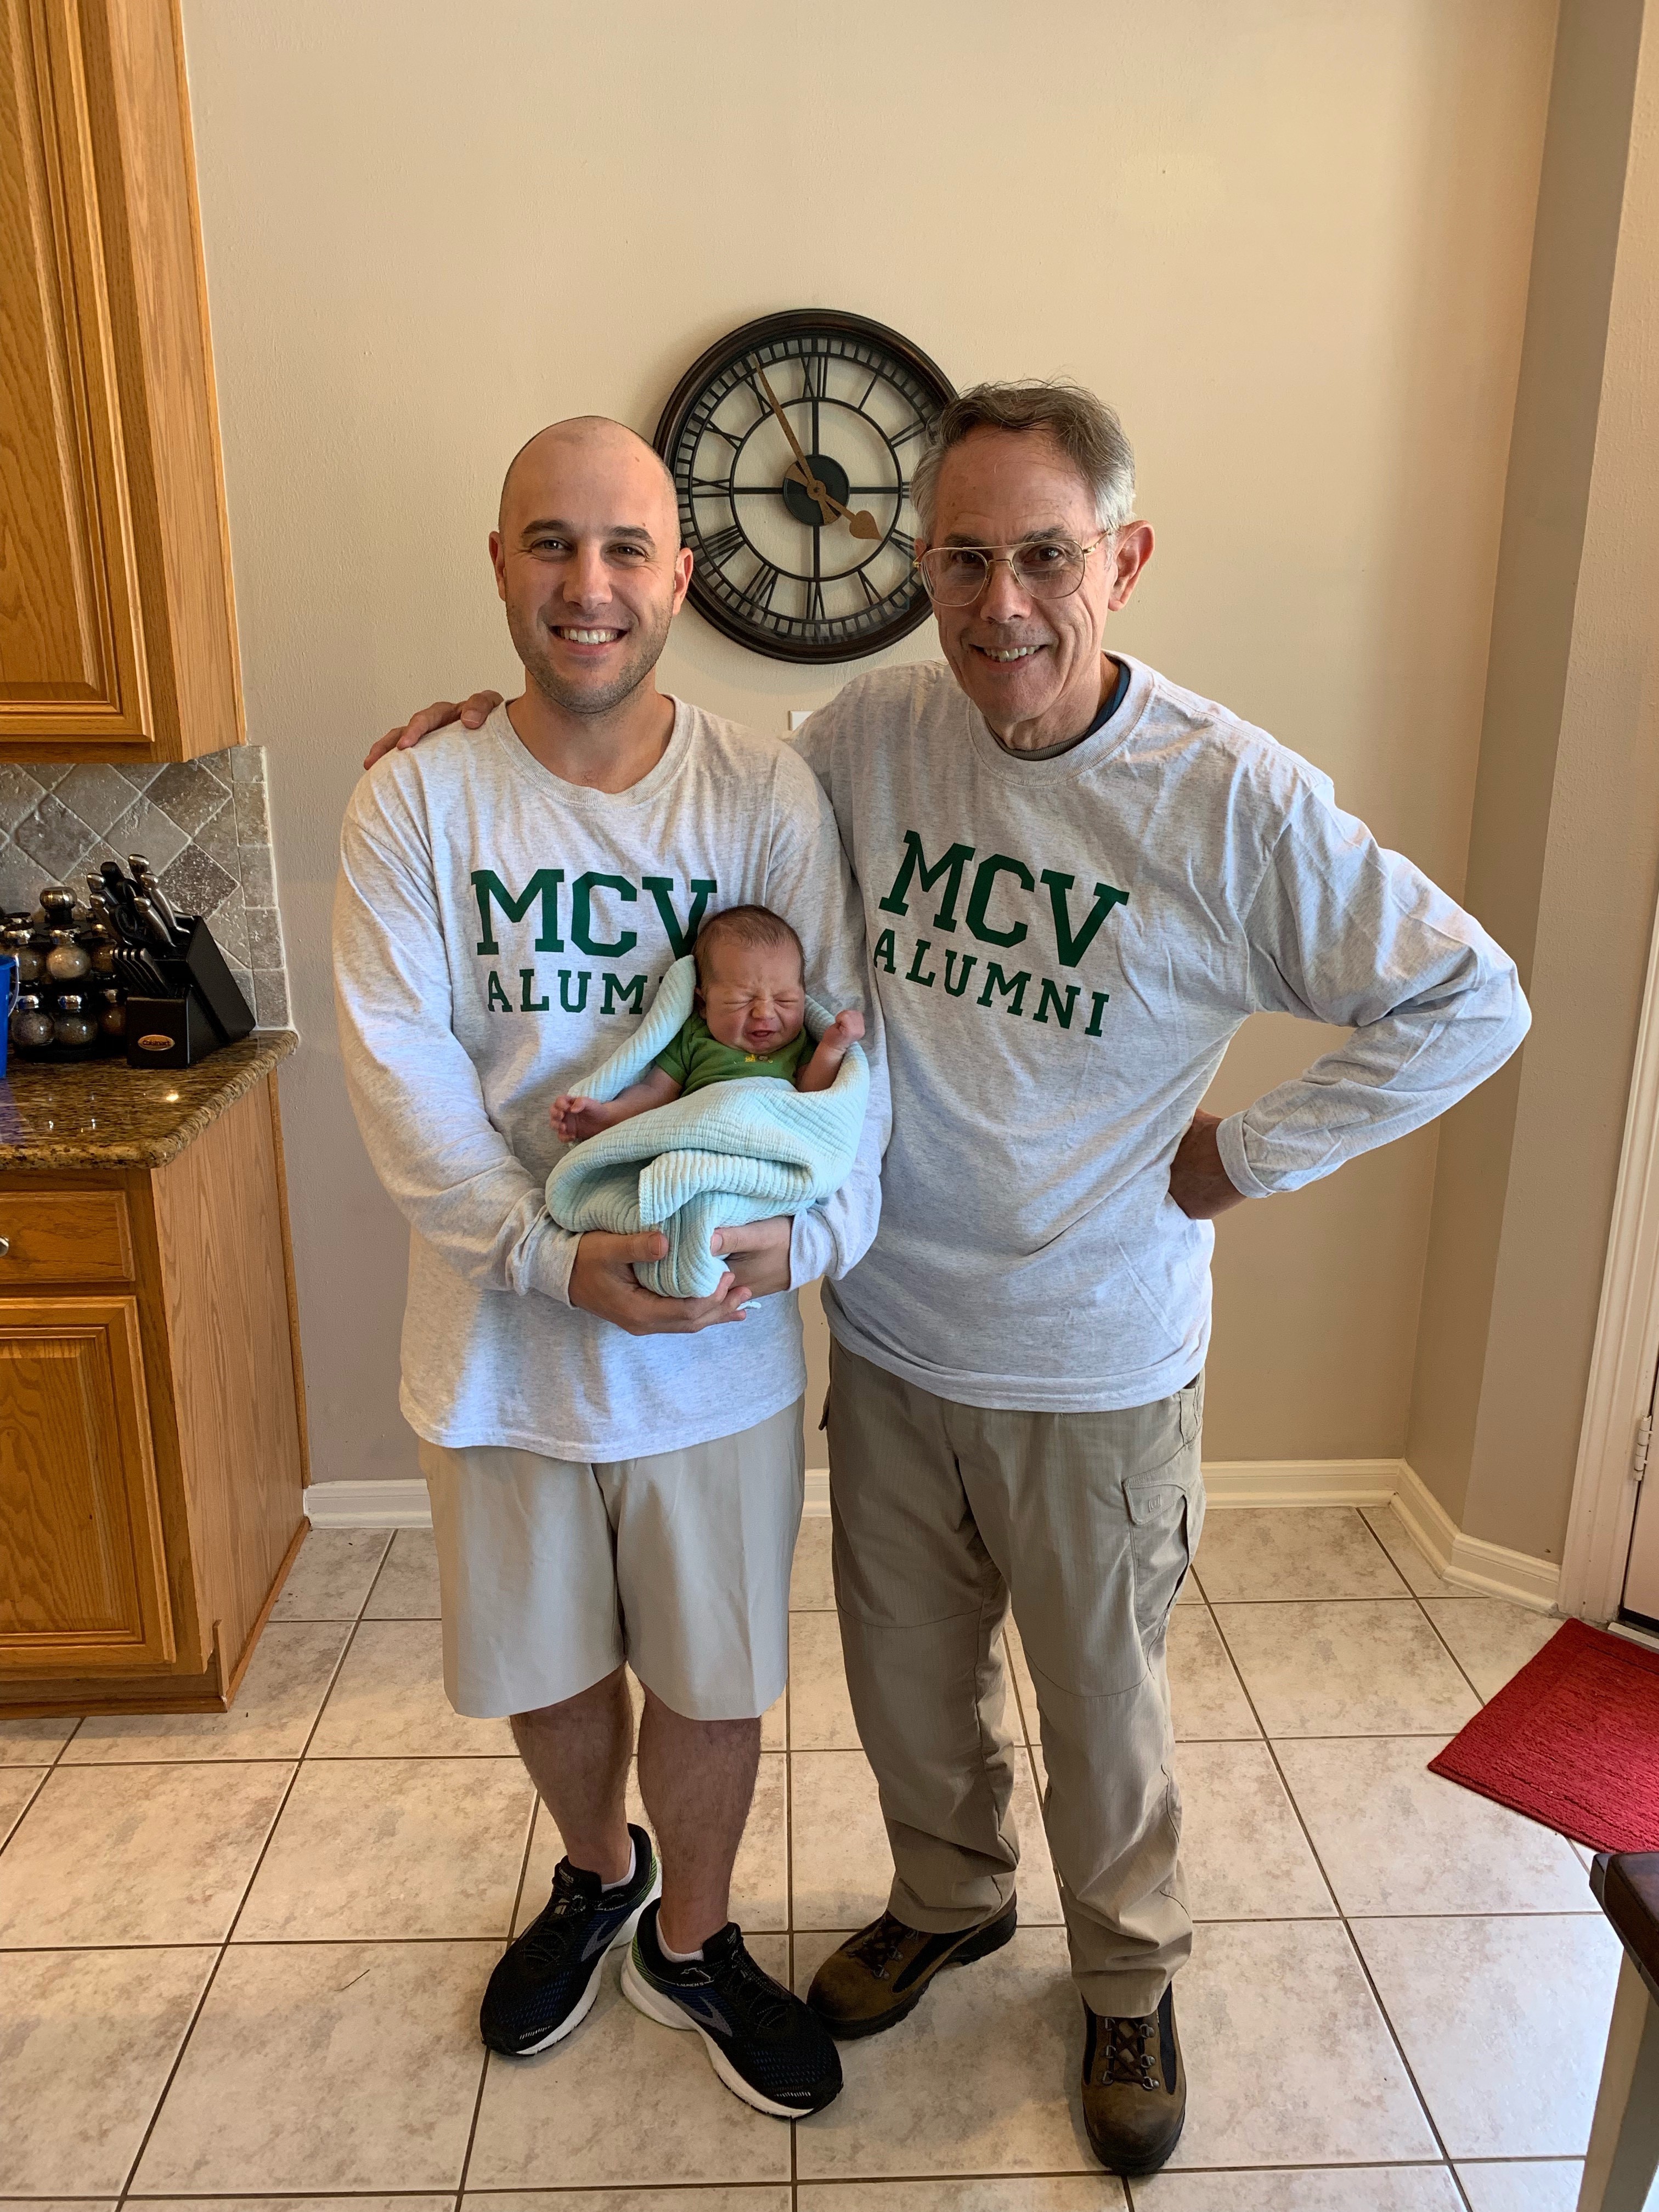 M13 Jeremy Ross holding son Aaron and standing next to father M71 Michael Ross